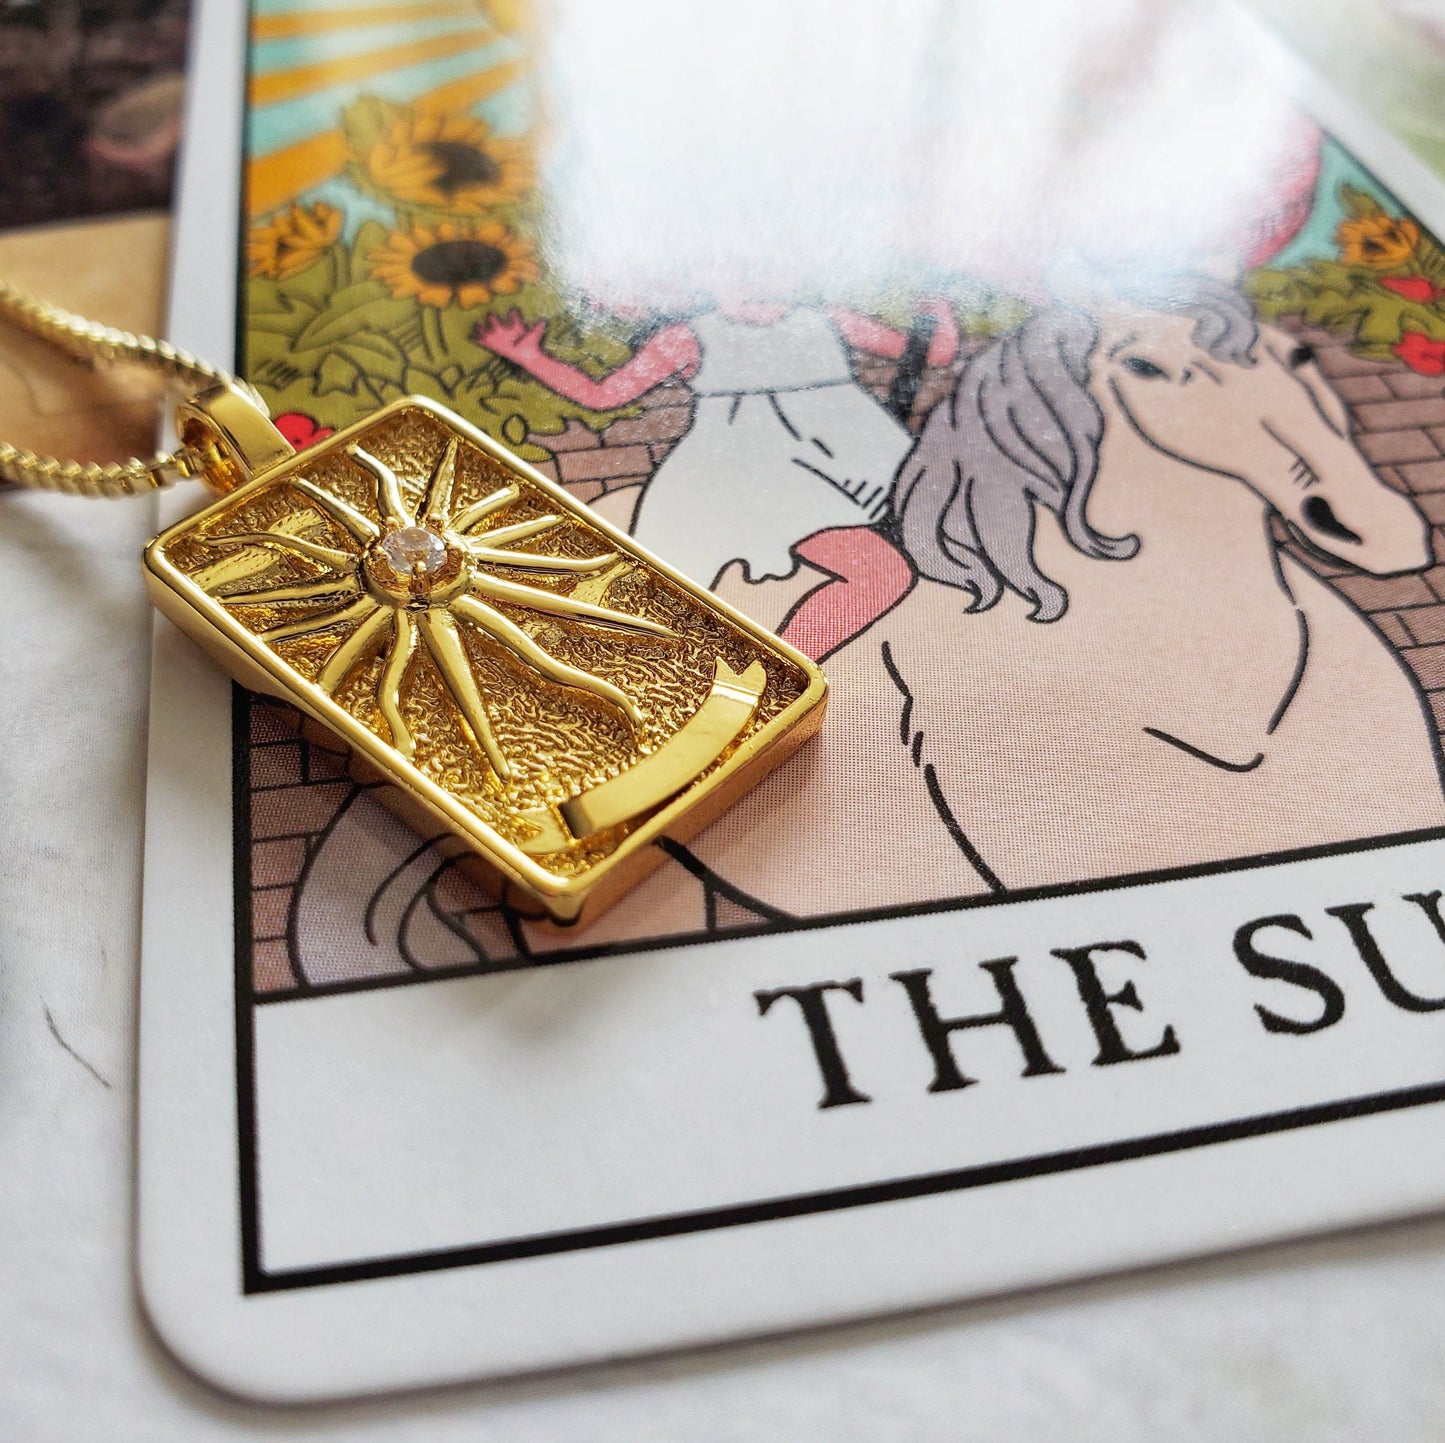 THE SUN Tarot Card Necklace | 14K Gold Box Chain Pendant Necklace | Delicate, Minimalist Intention Necklace for Good Fortune & Happiness